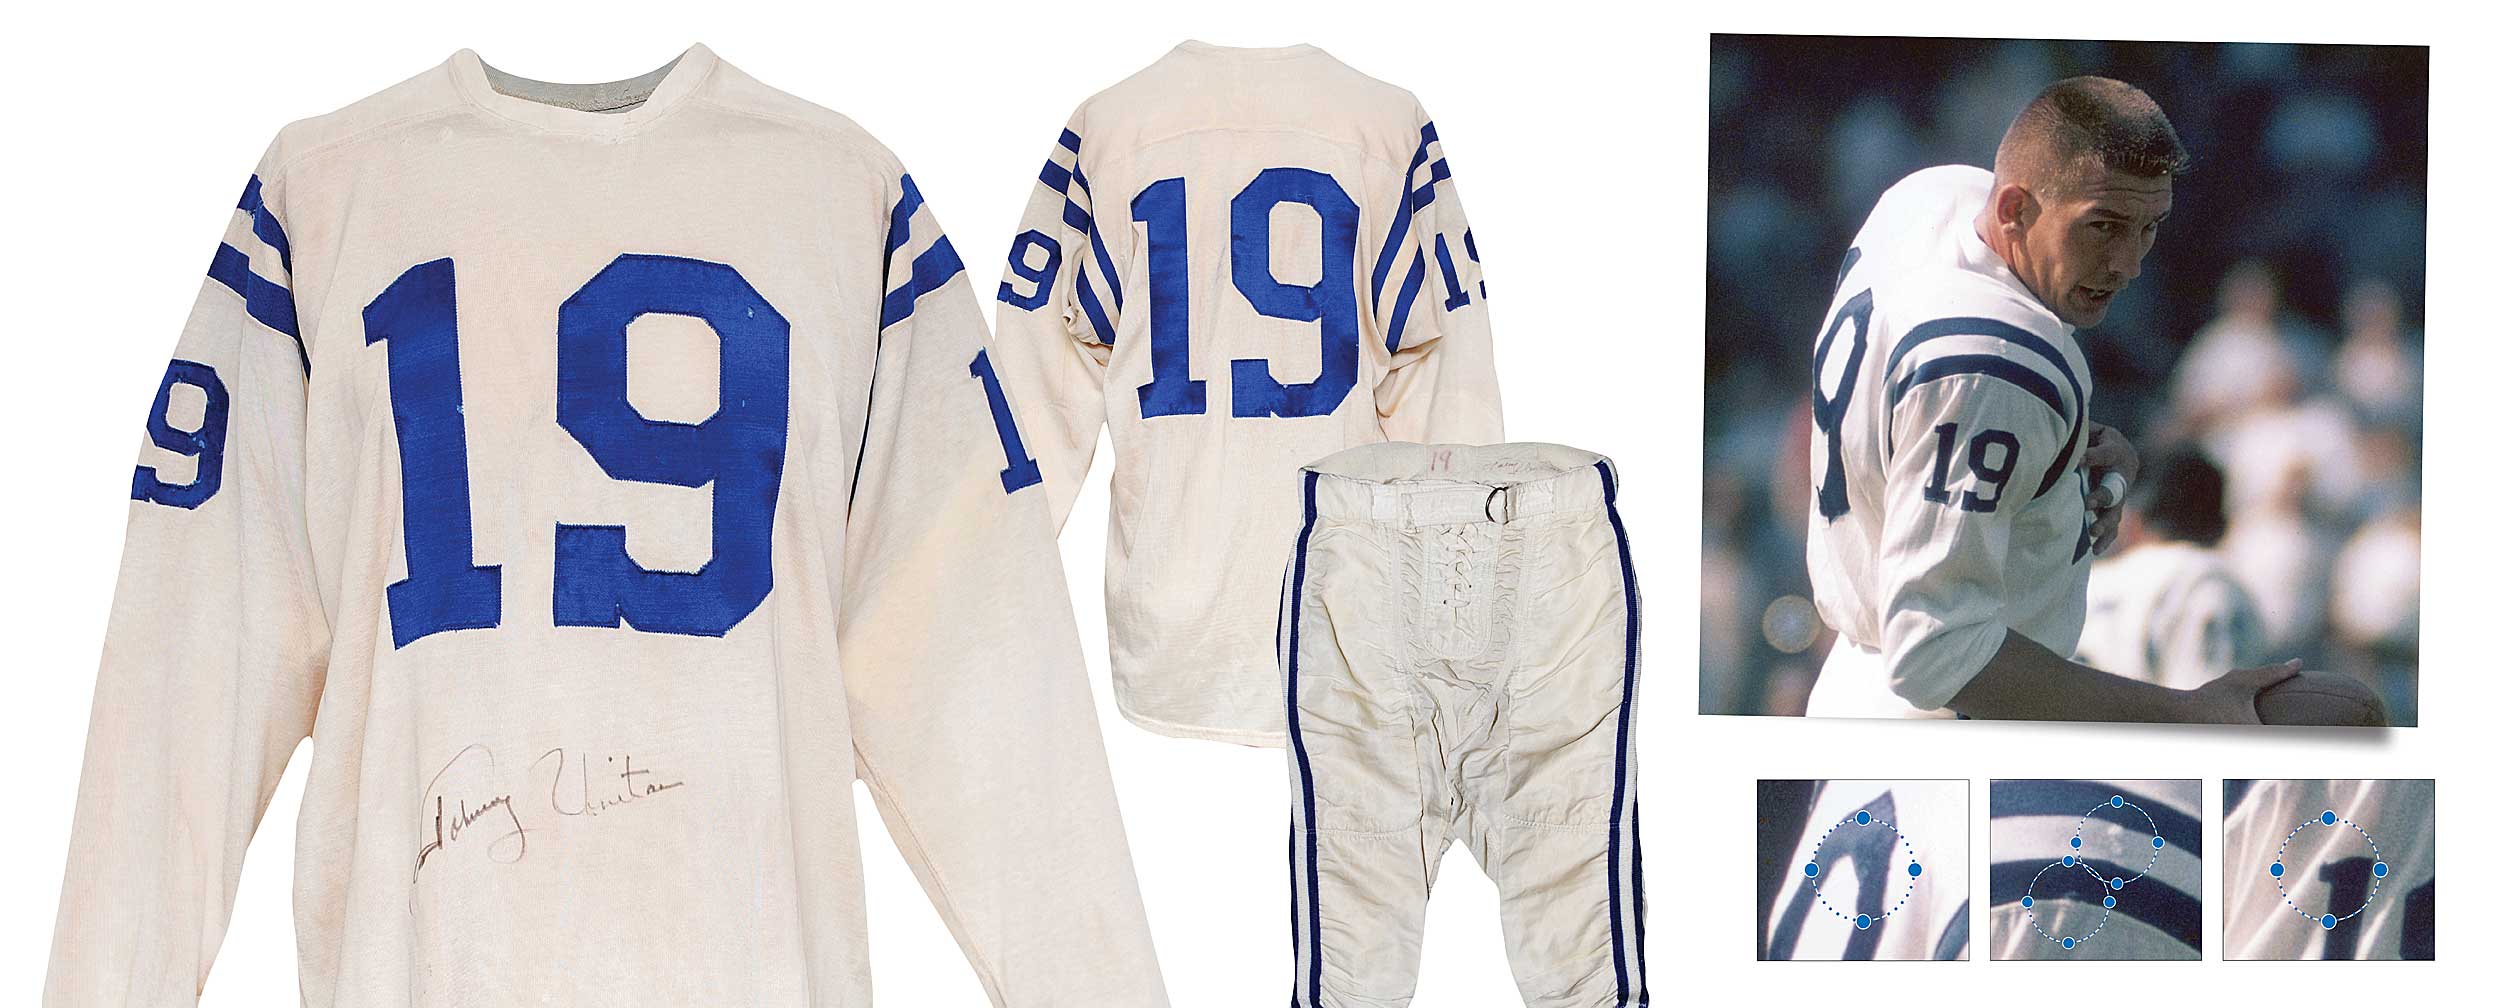 Johnny Unitas football jersey sets auction record, selling for $118K